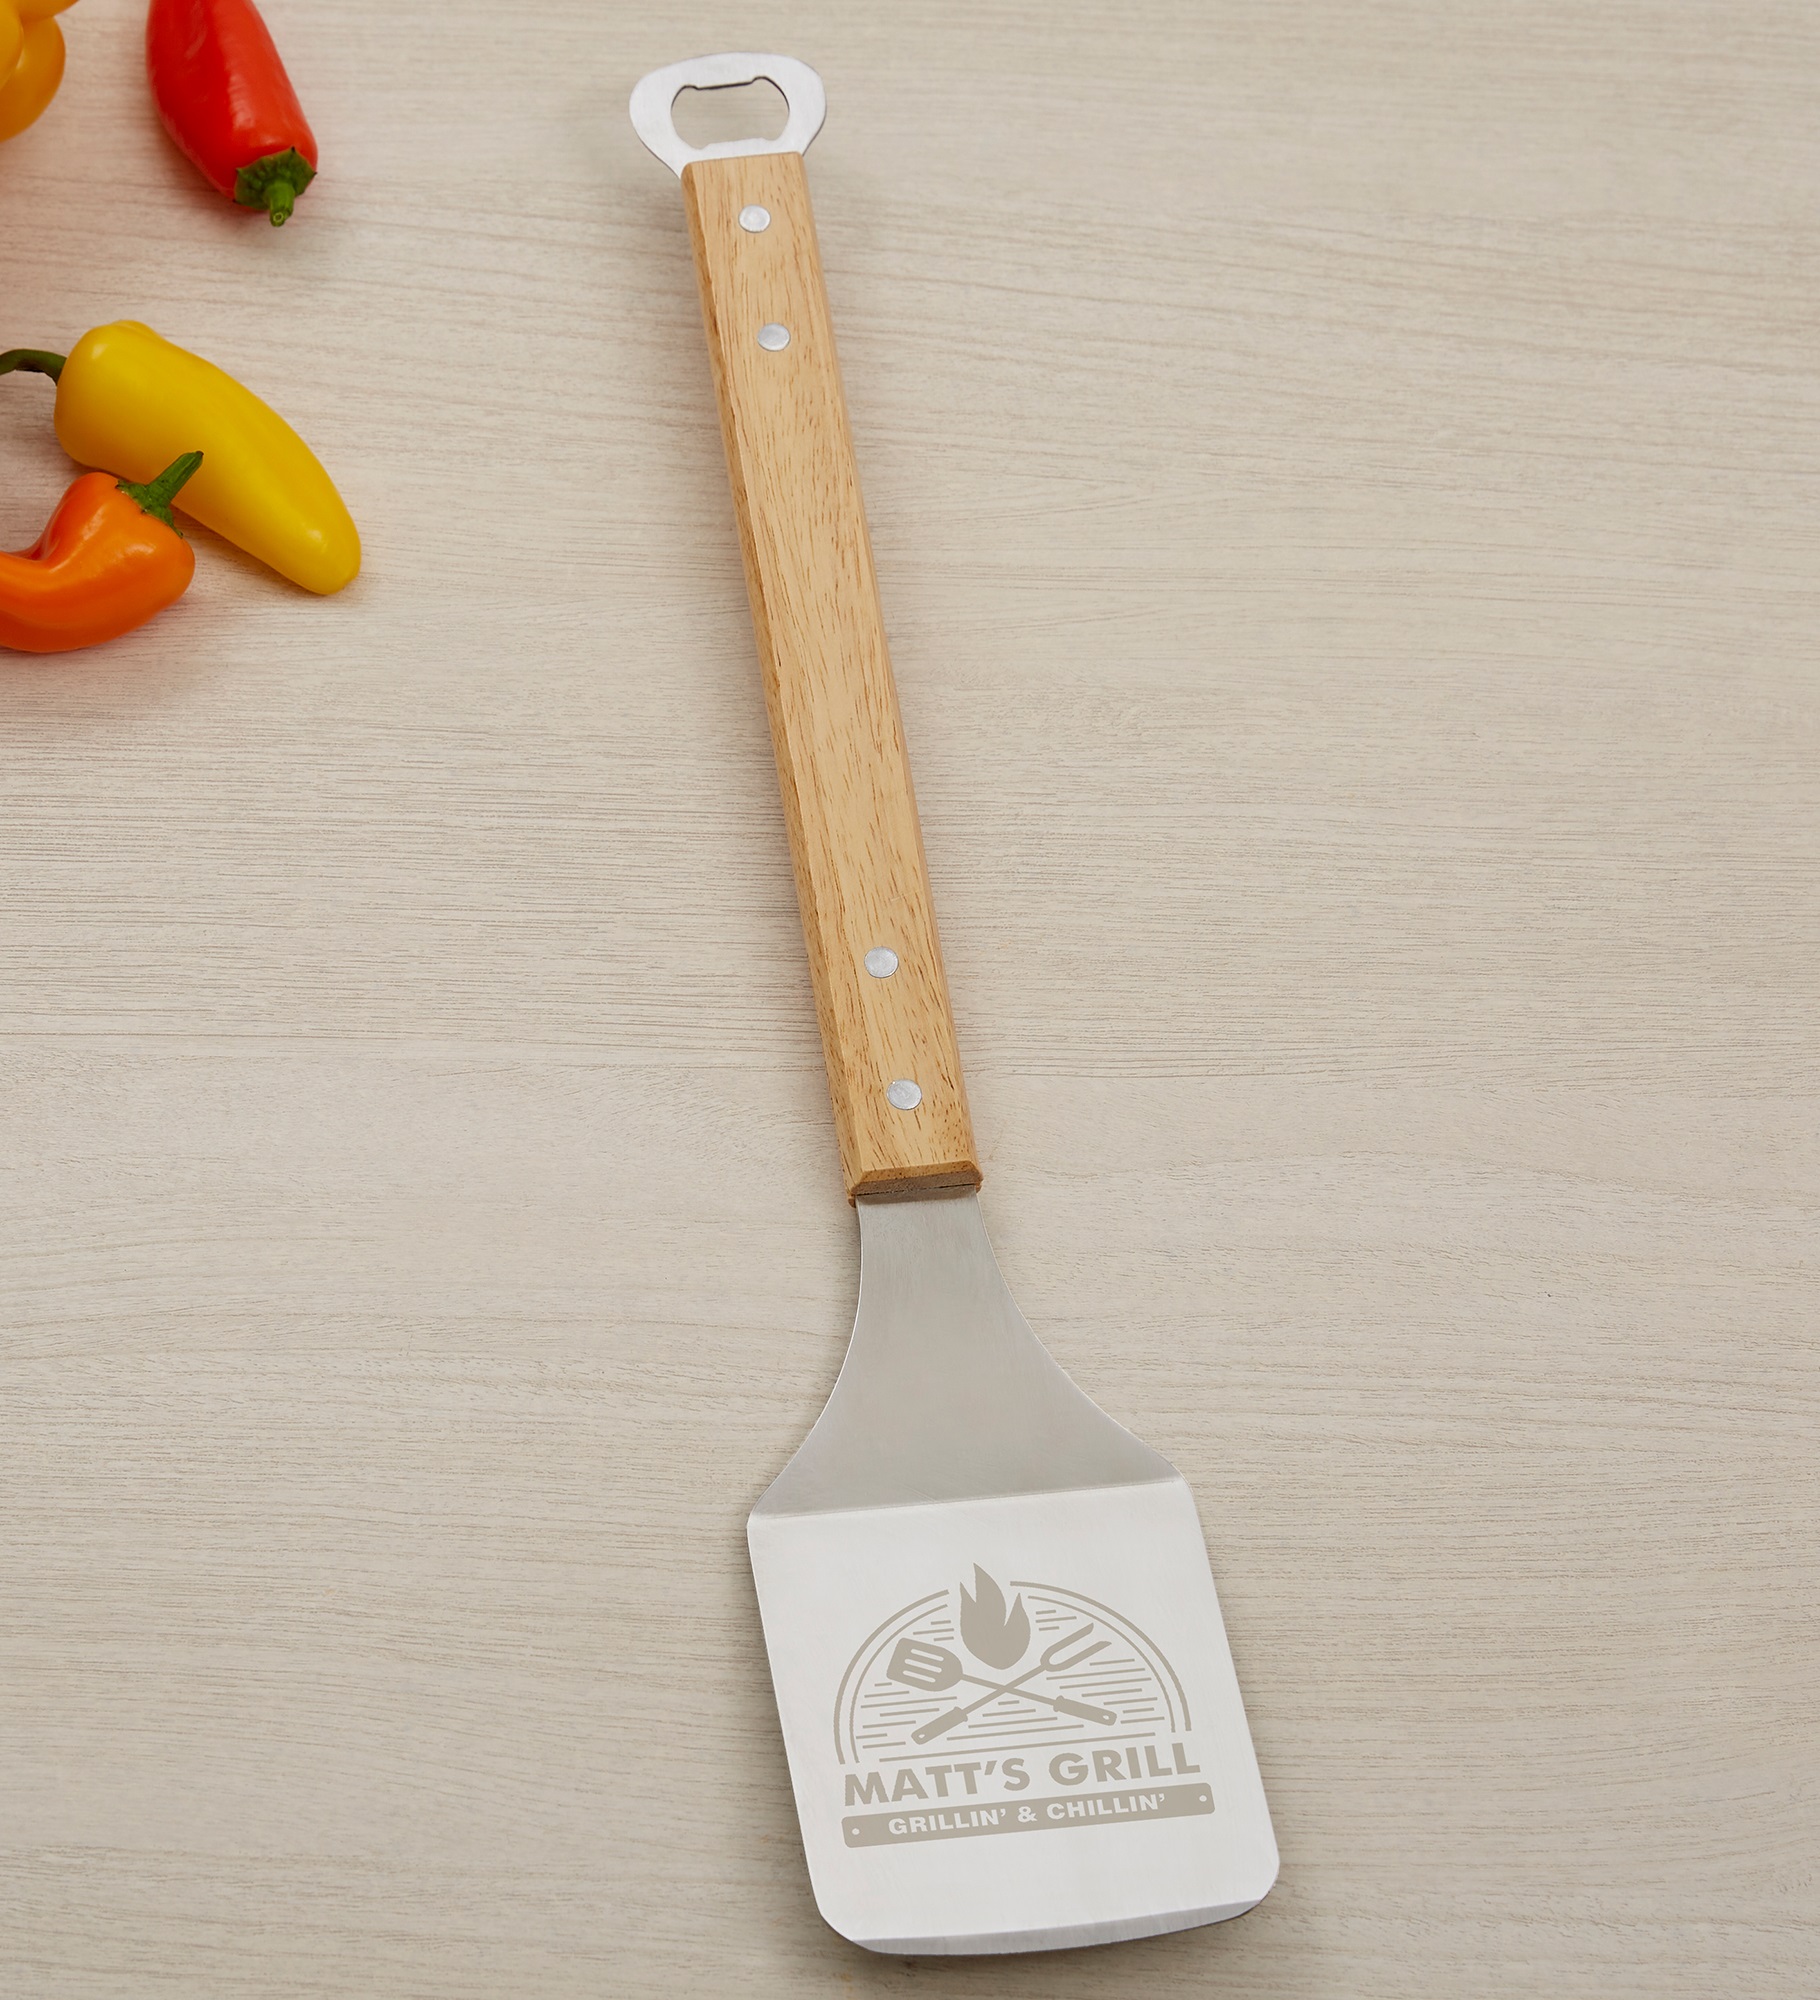 The Grill Personalized Stainless Steel Bottle Opener Spatula